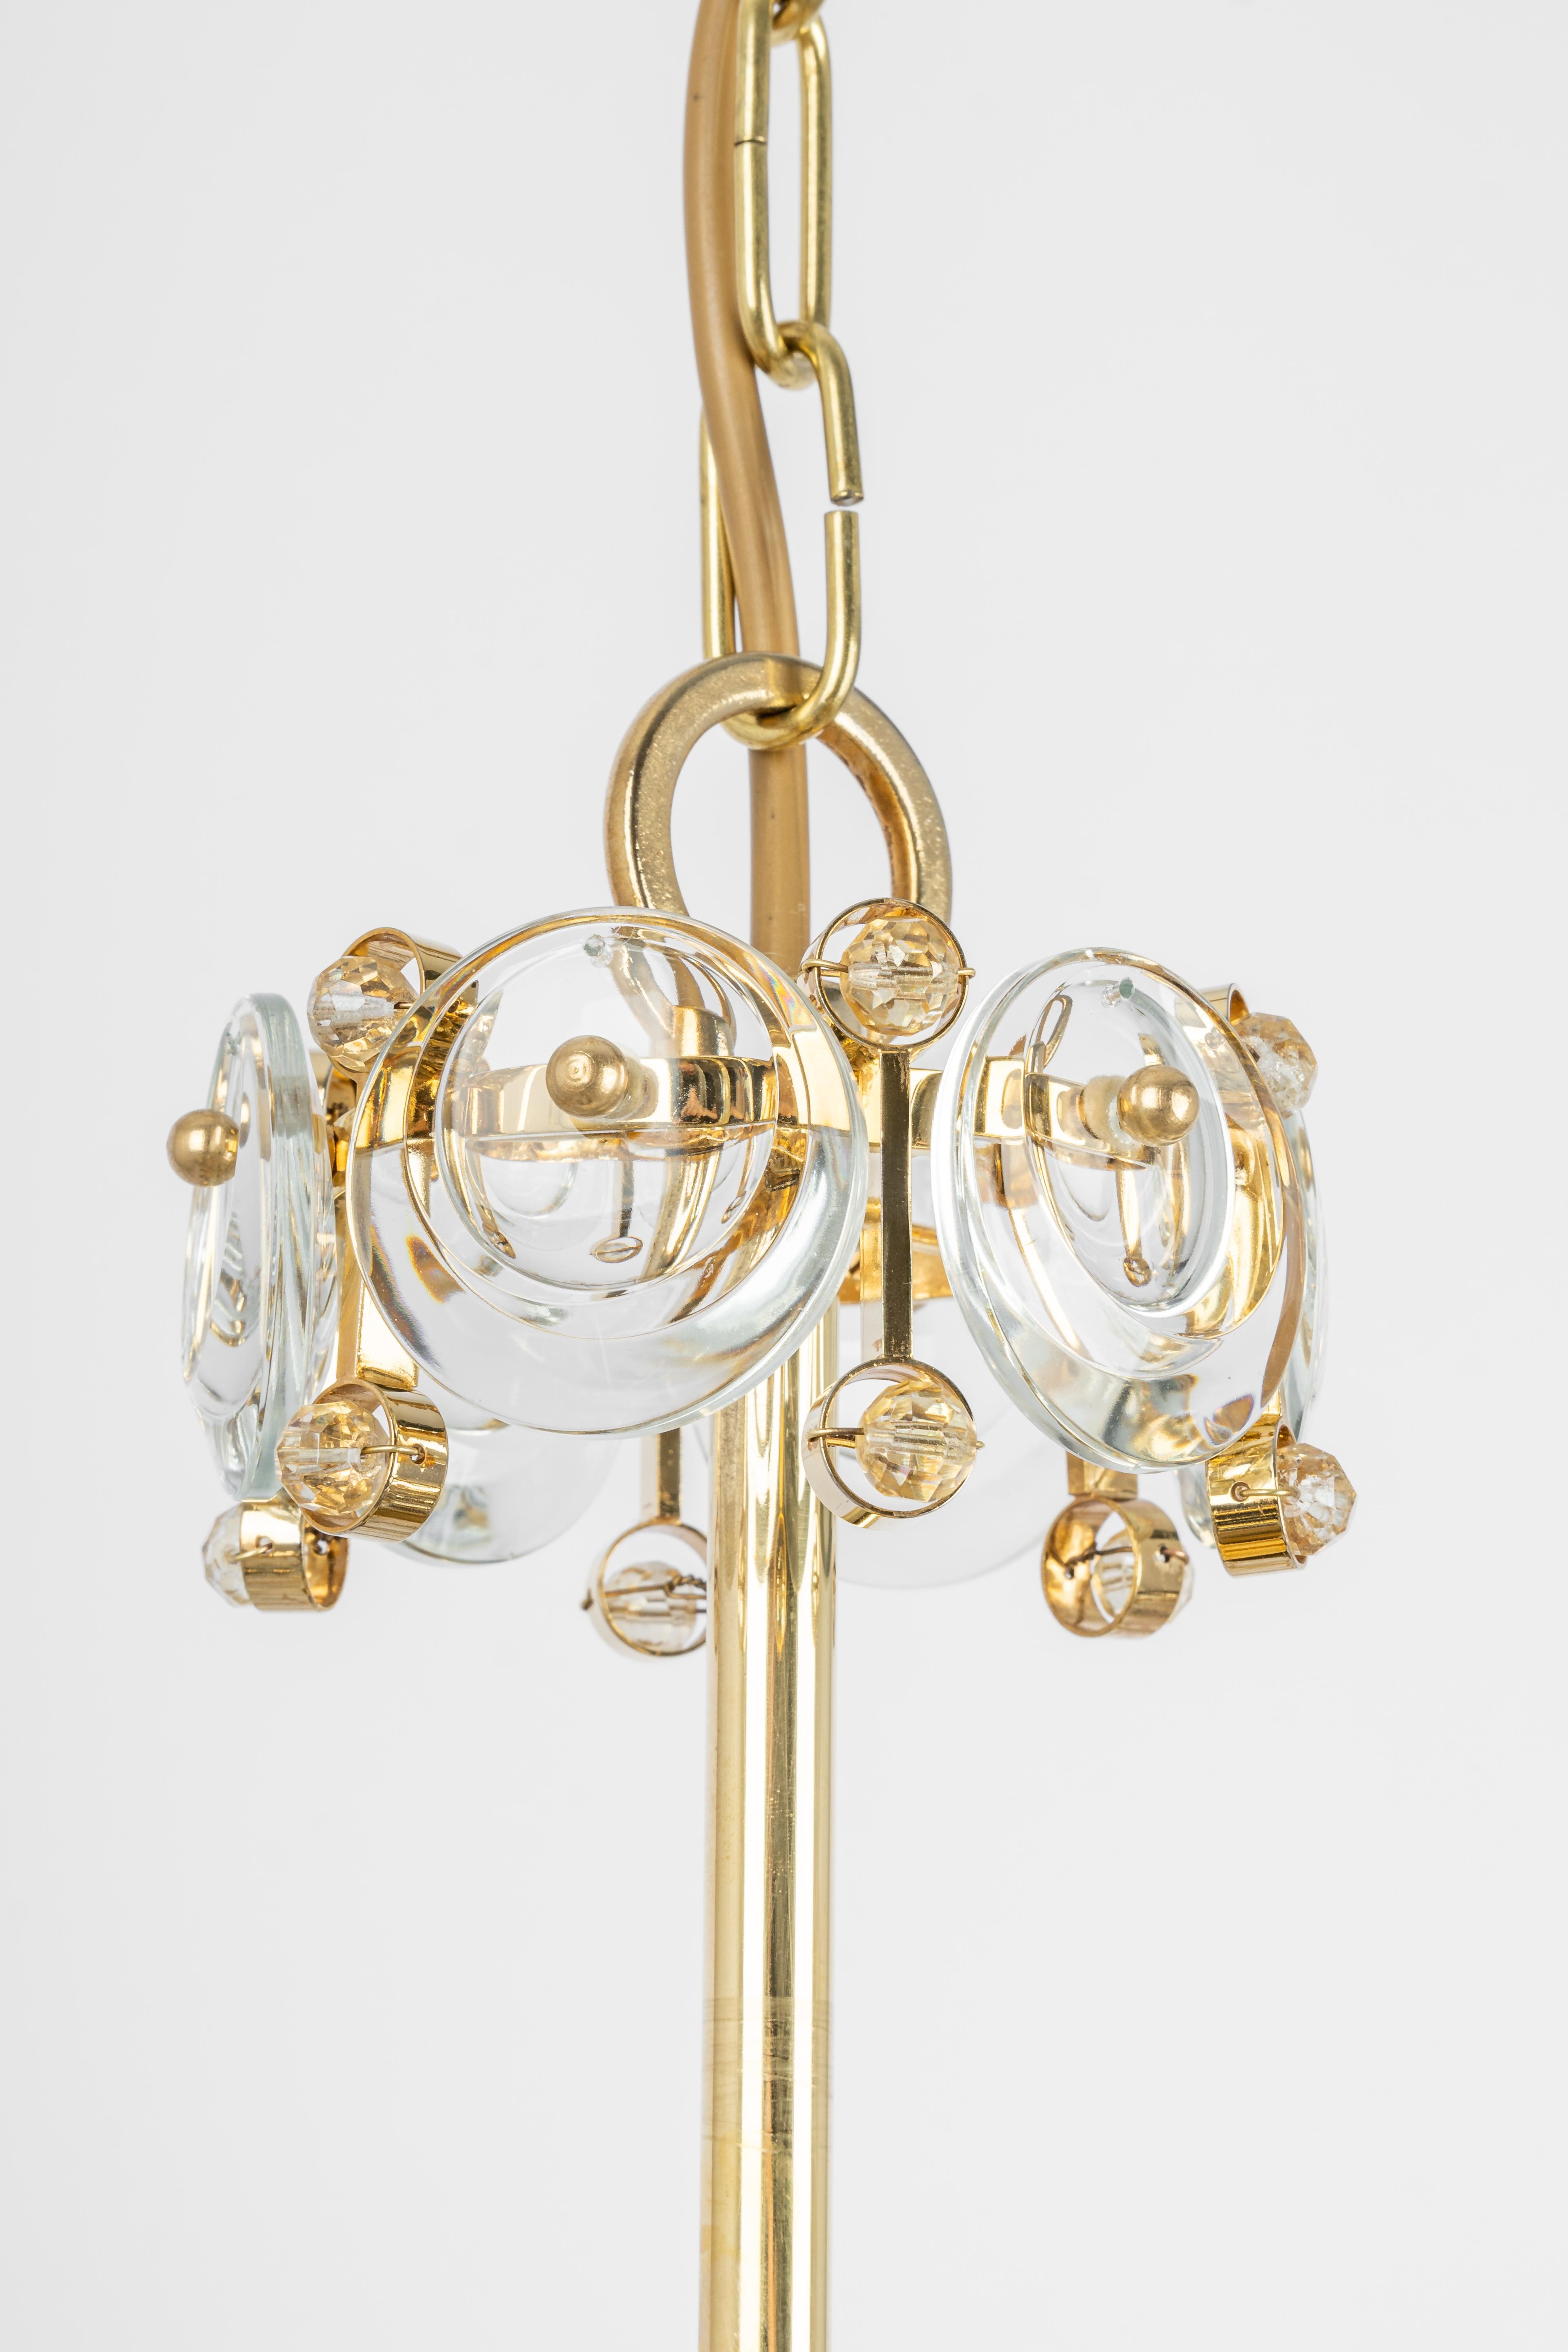 Delicate Gilt Brass Crystal Chandelier by Palwa, Sciolari Design, Germany, 1970s For Sale 7